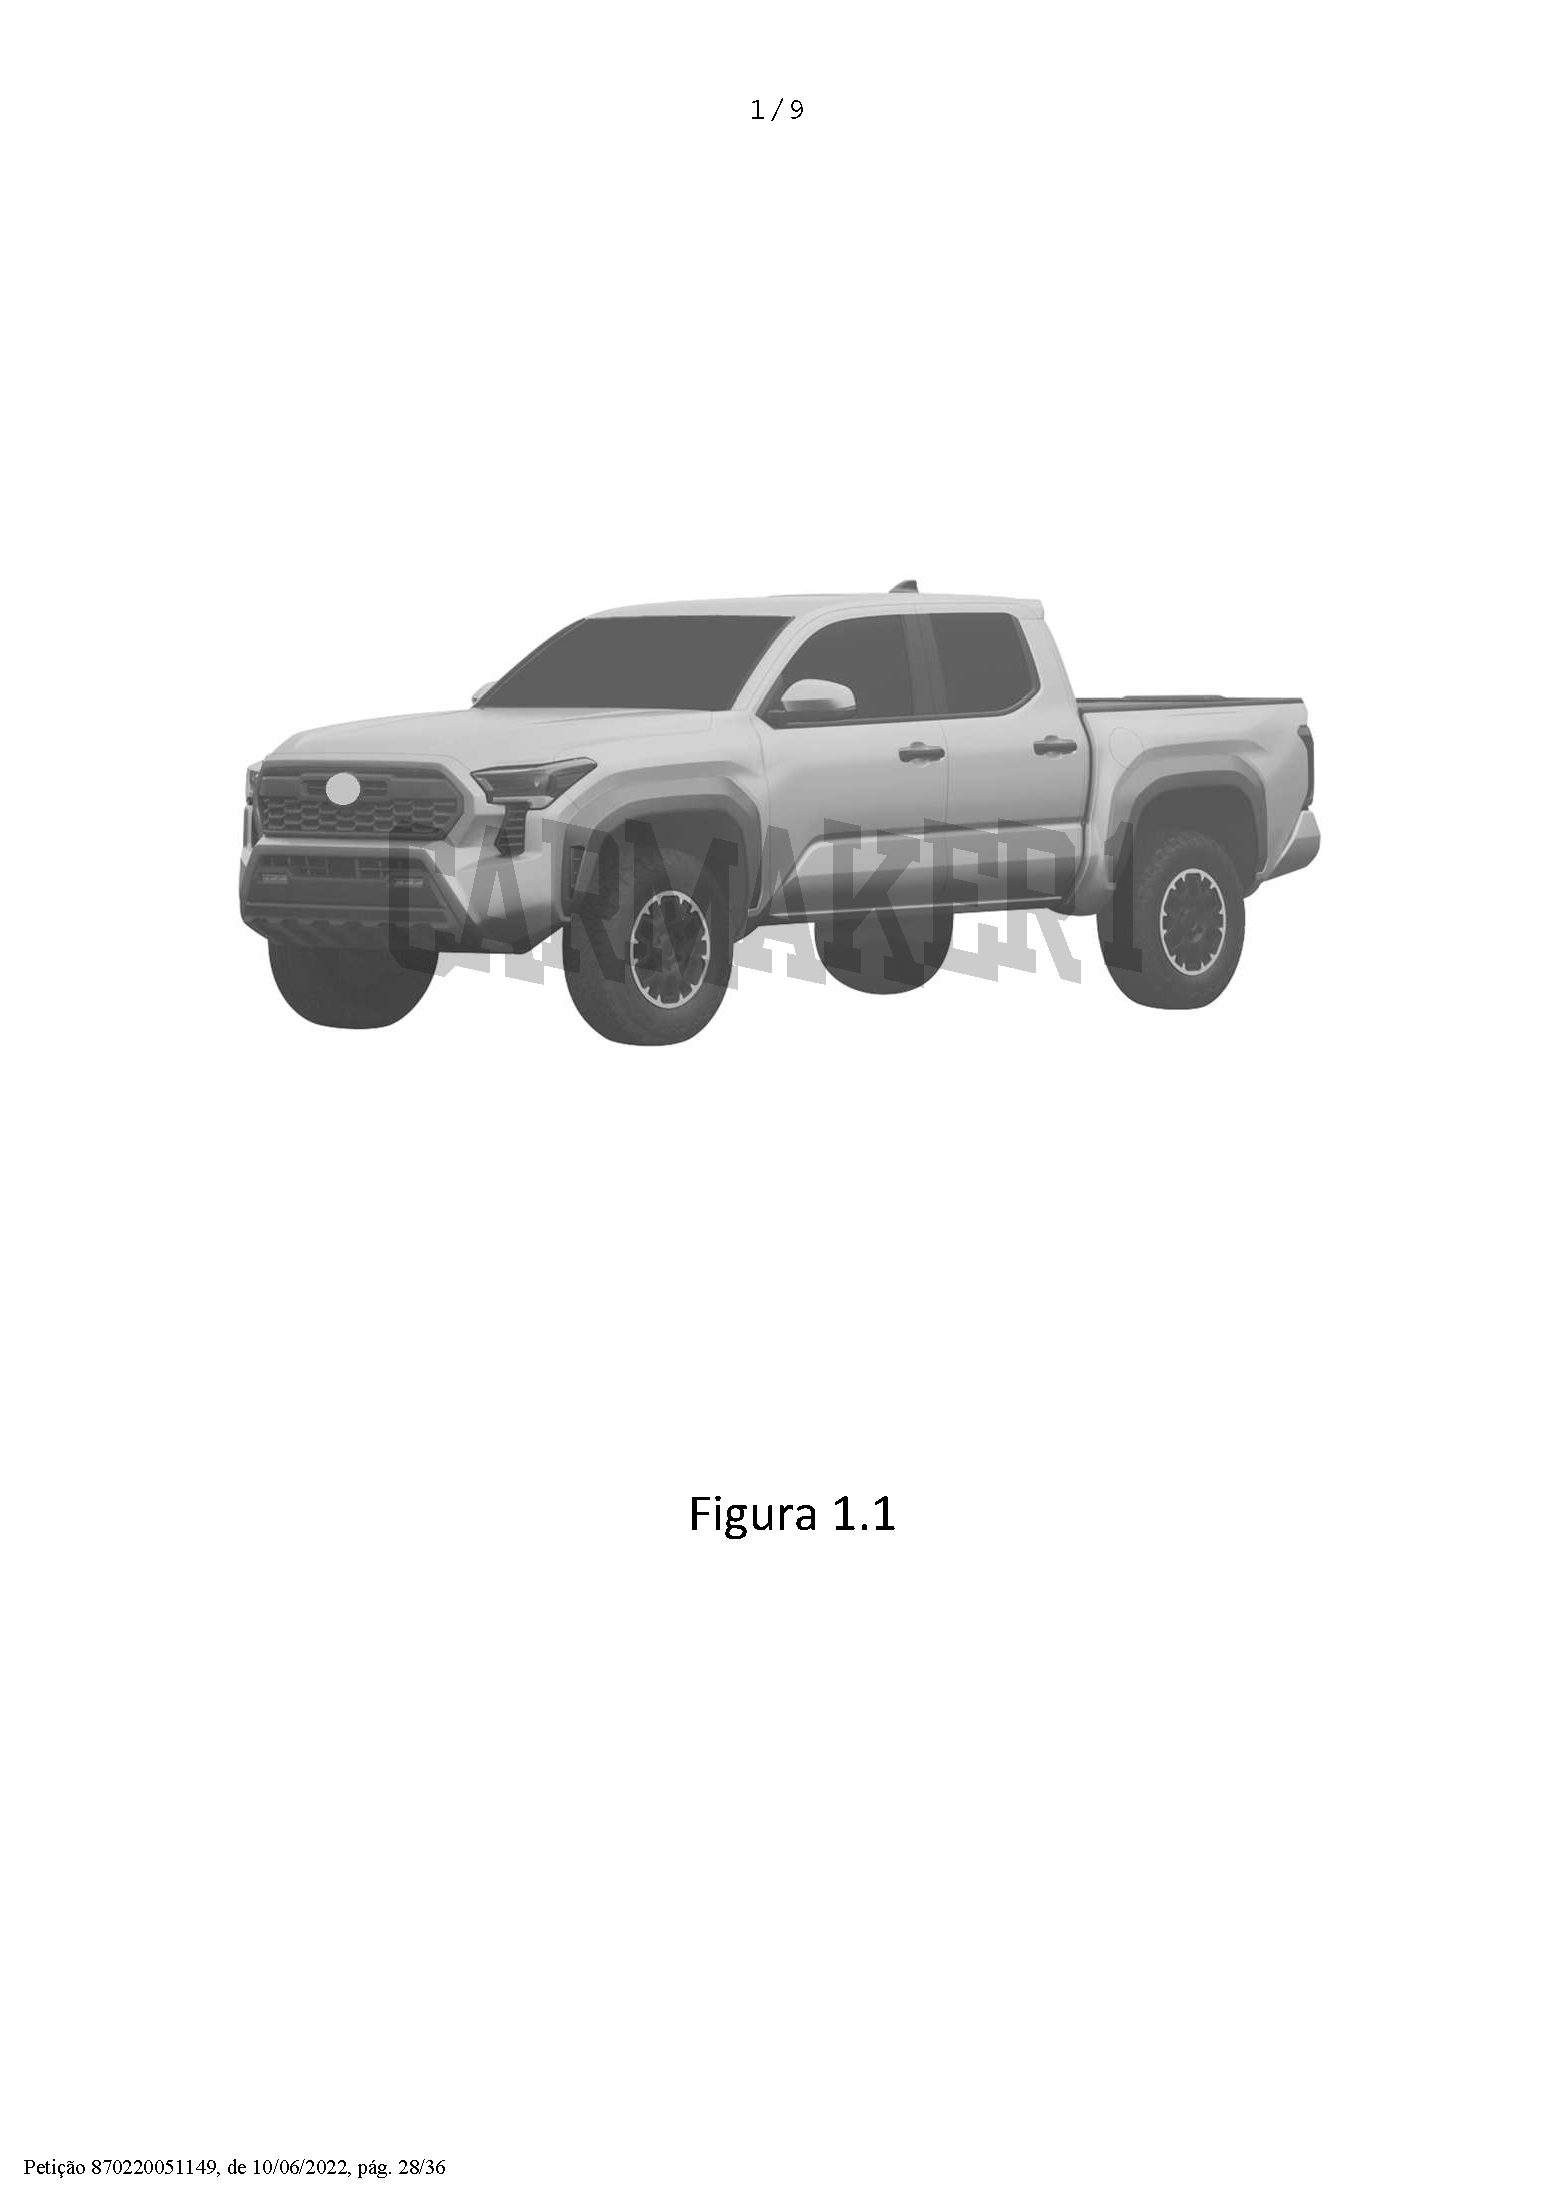 2024 Tacoma 2024 Tacoma Design Images Revealed in Patent! 📸 🕵🏻‍♂️ 302022003011_Page_04